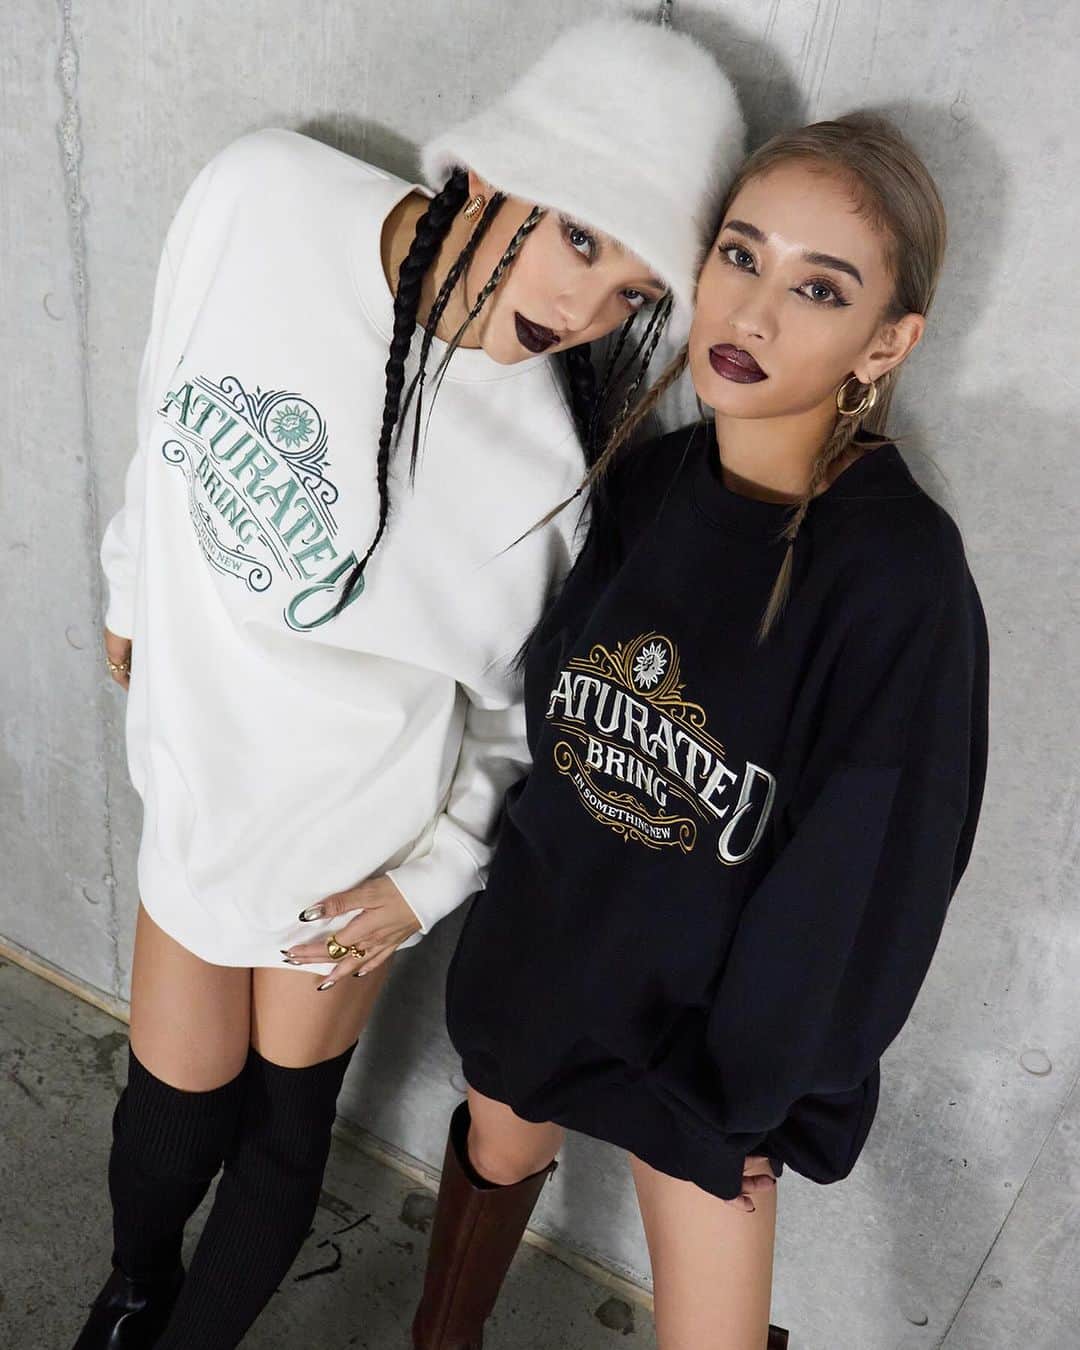 EVRISのインスタグラム：「⠀ -EVRIS 2023 WINTER OUTFITS- STARRING YURINO X ANNA SUDA  DROP NOW  #SATURATEDスウェットトップス WHT/GRY/NVY/BLK ¥8,800(税込)  ___________________________________________ 🔻公式通販サイトRUNWAY channelは  @evris_official TOPのURLから✔︎  #EVRIS」